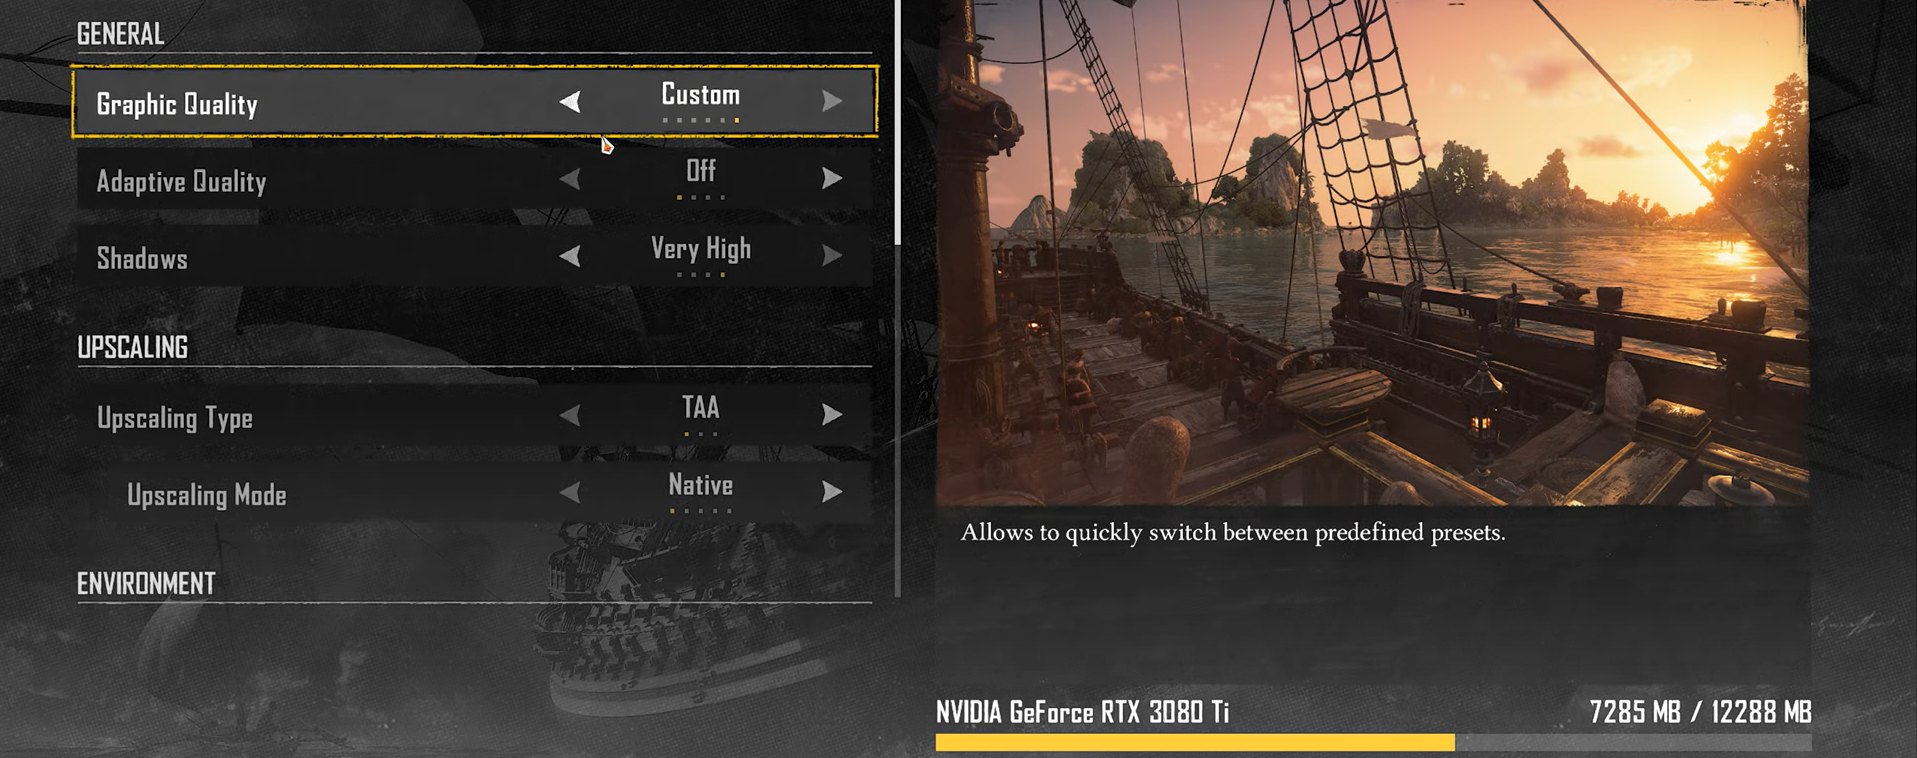 screen showing graphics settings for skull and bones